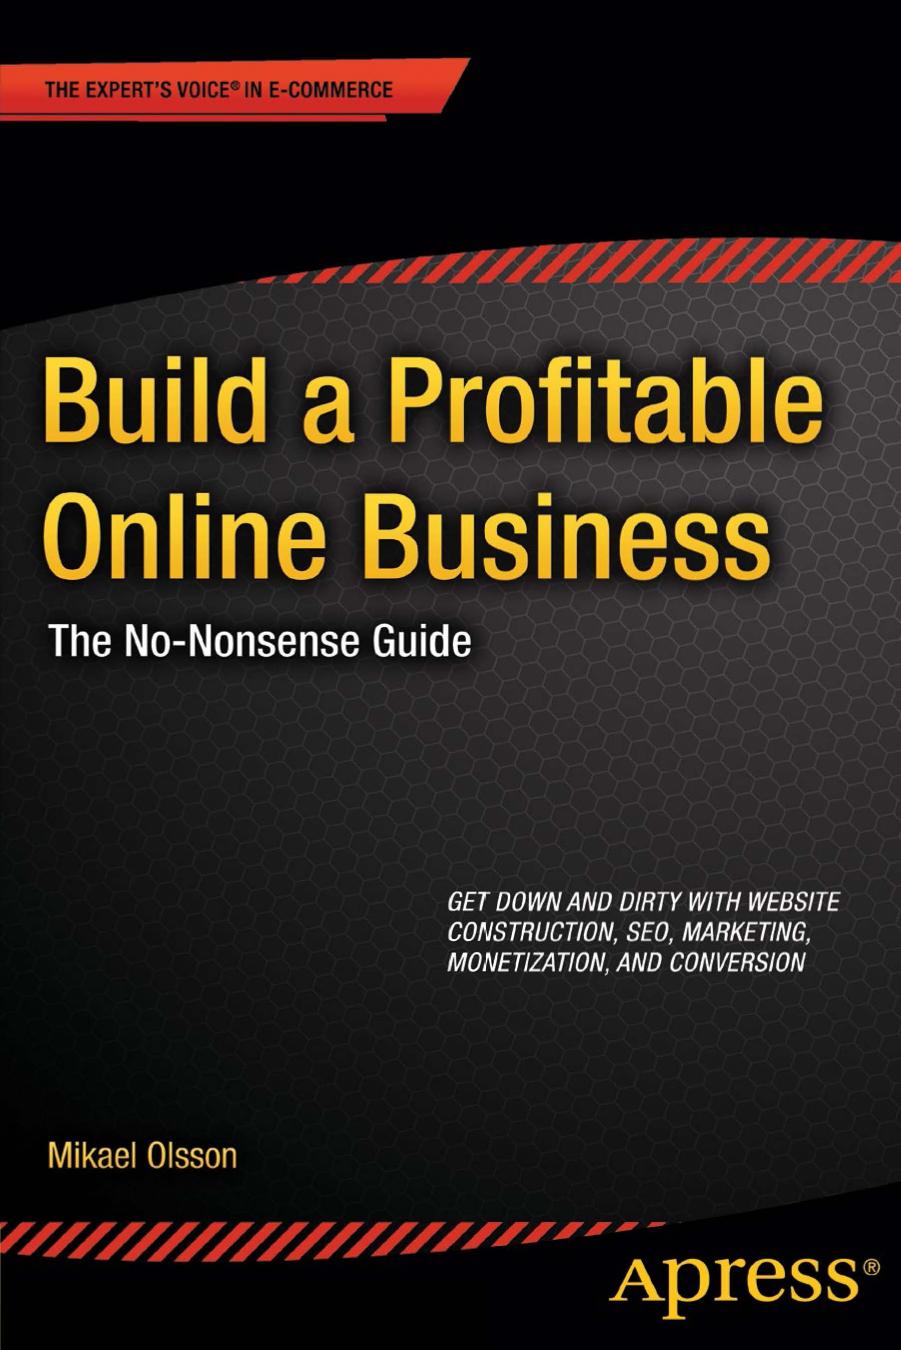 Build a Profitable Online Business: The No-Nonsense Guide by Mikael Olsson